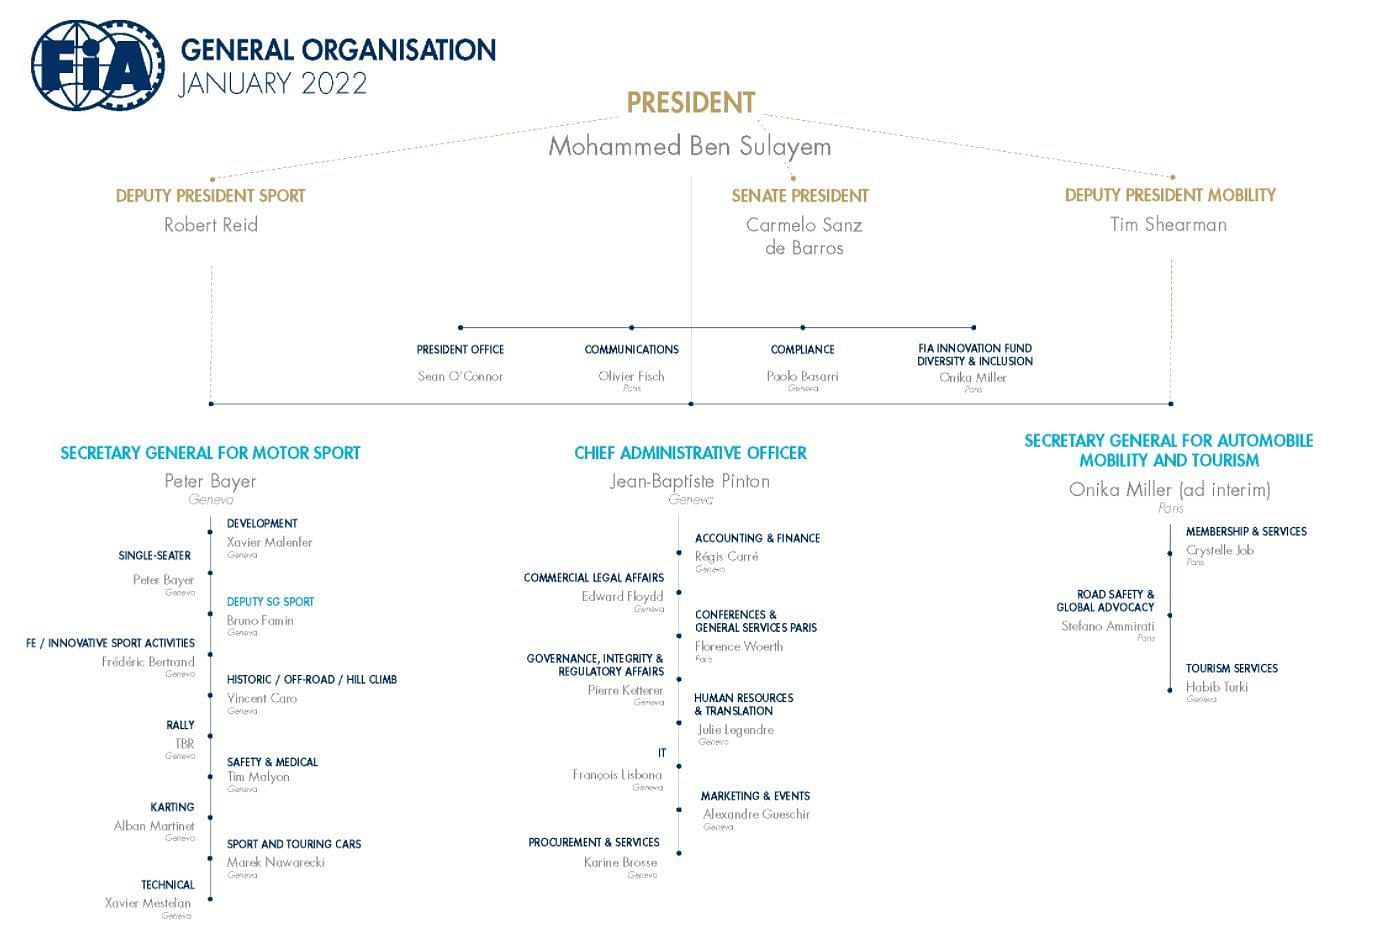 Organizational Chart for the year 2022, as per the FIA Official Website